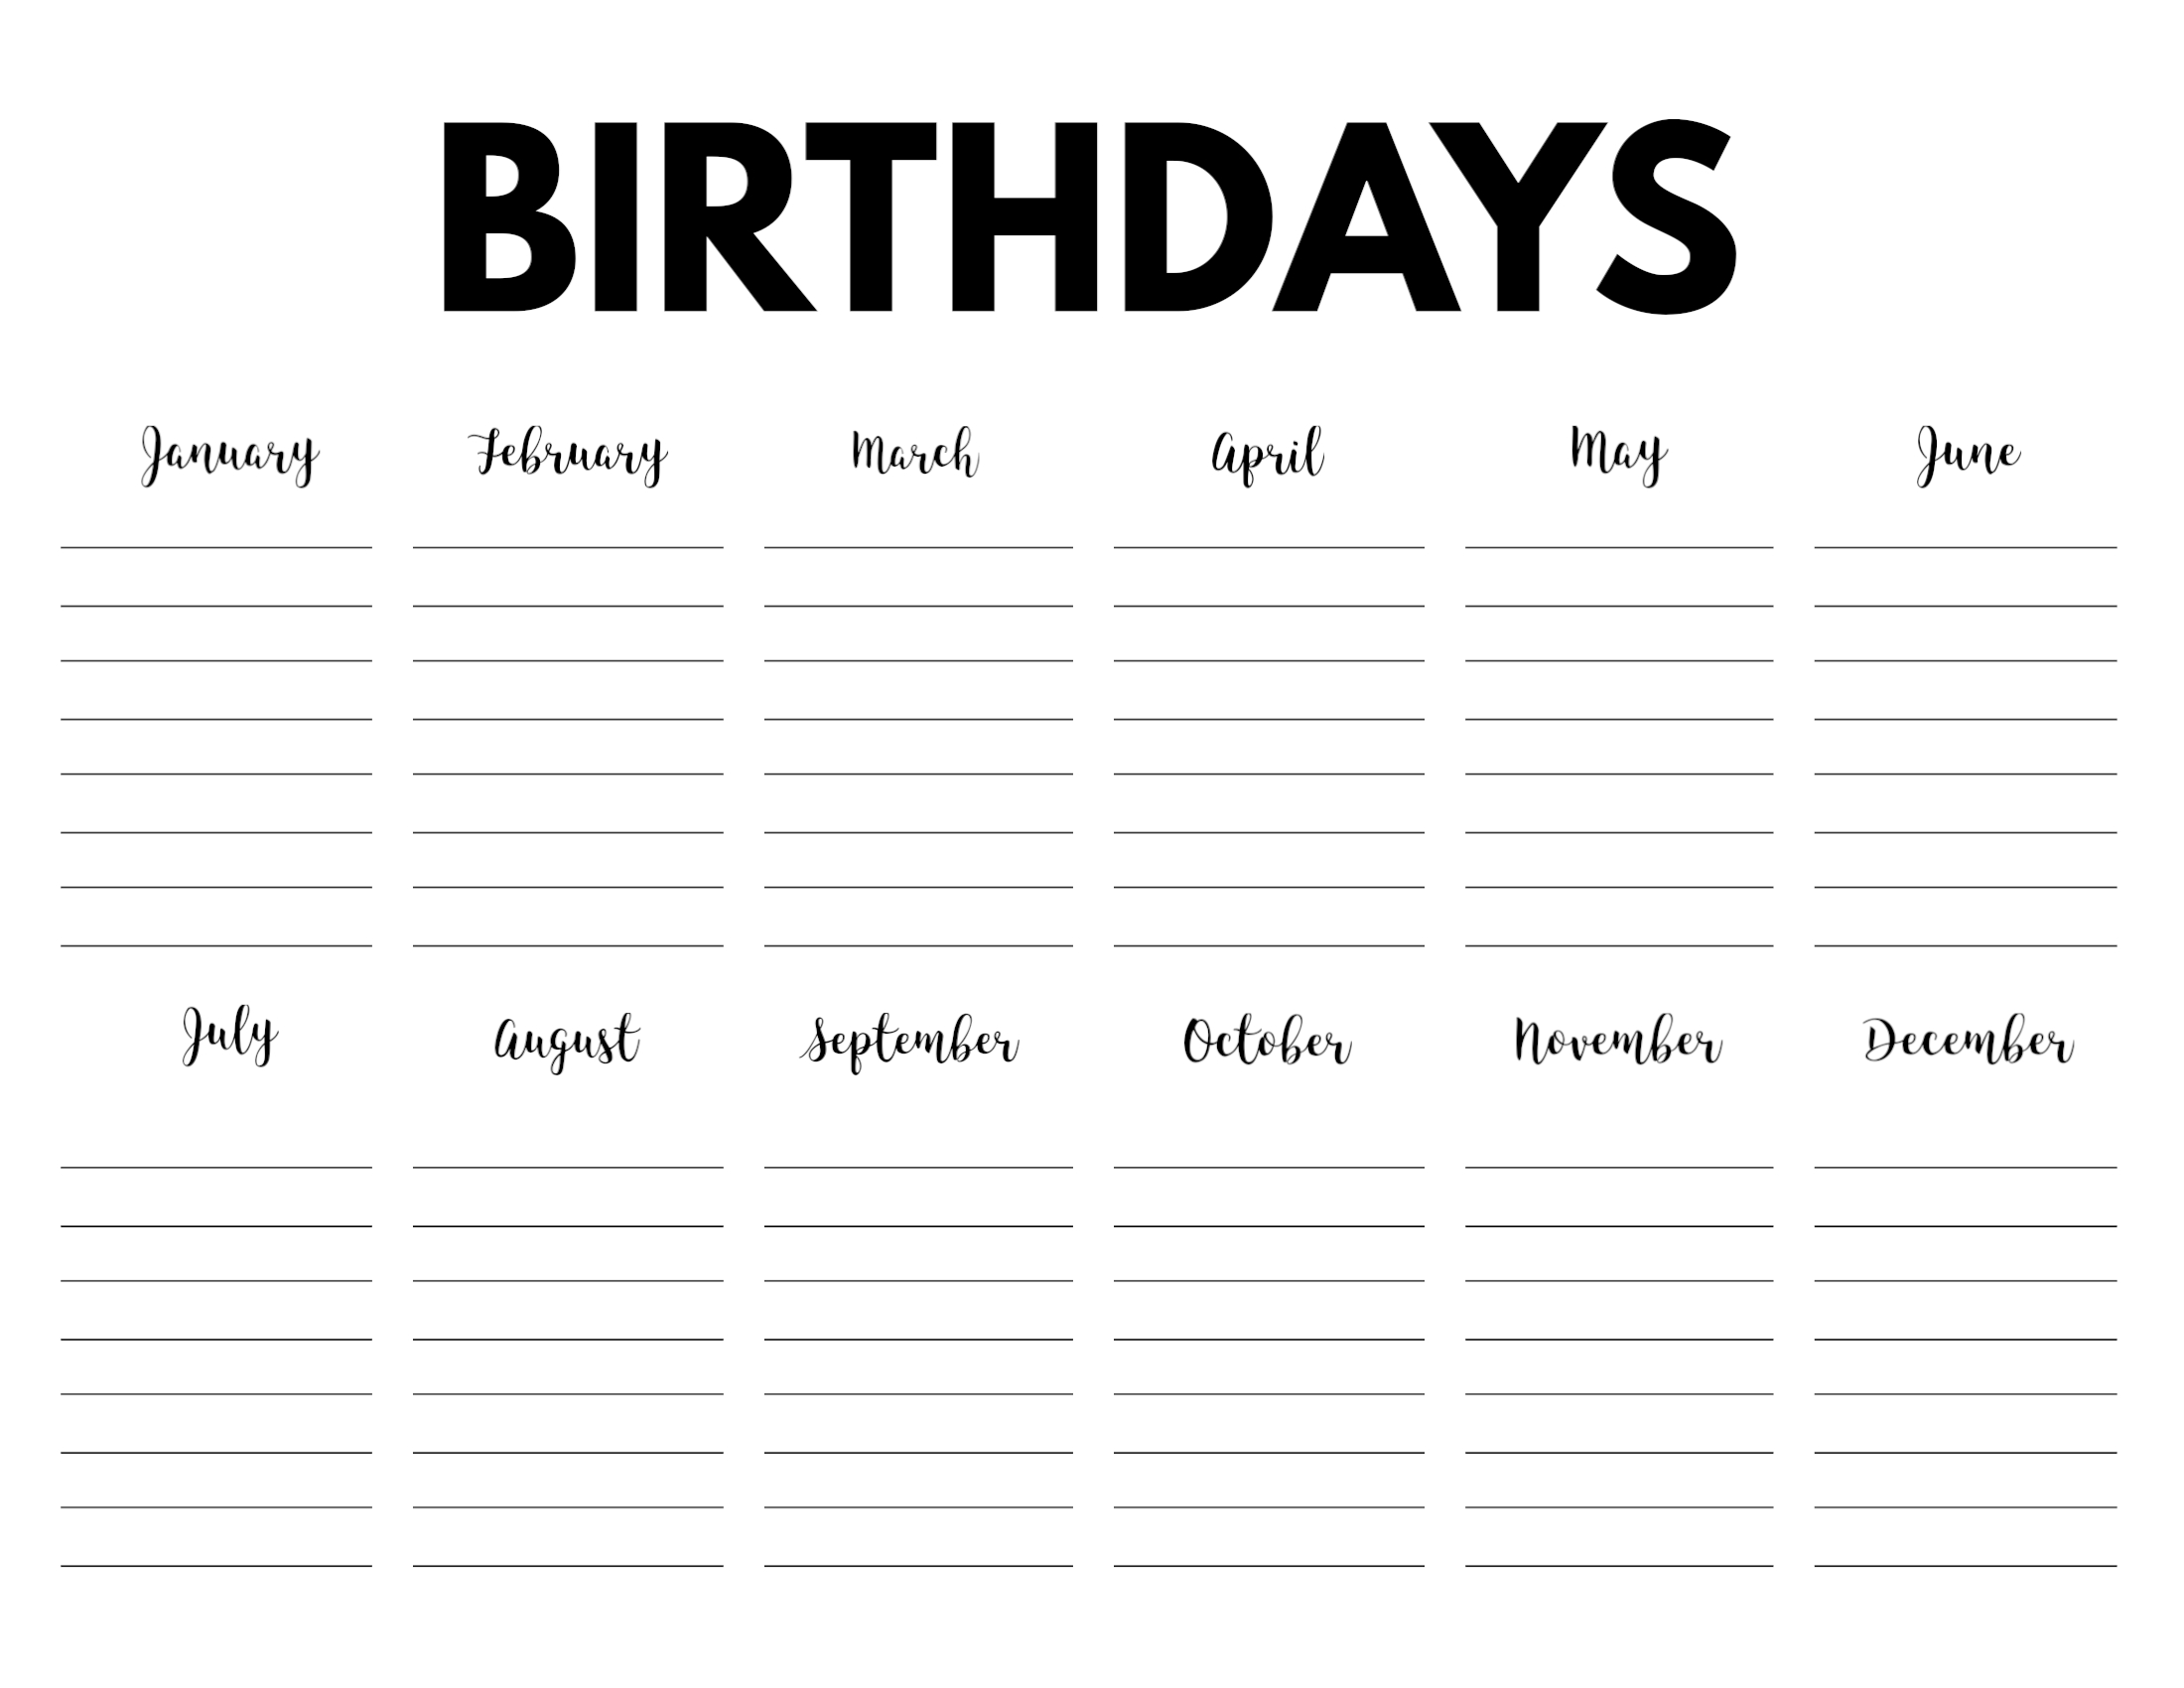 Free Printable Birthday Calendar Template  Paper Trail Design intended for Classroom Birthday Calendar Template